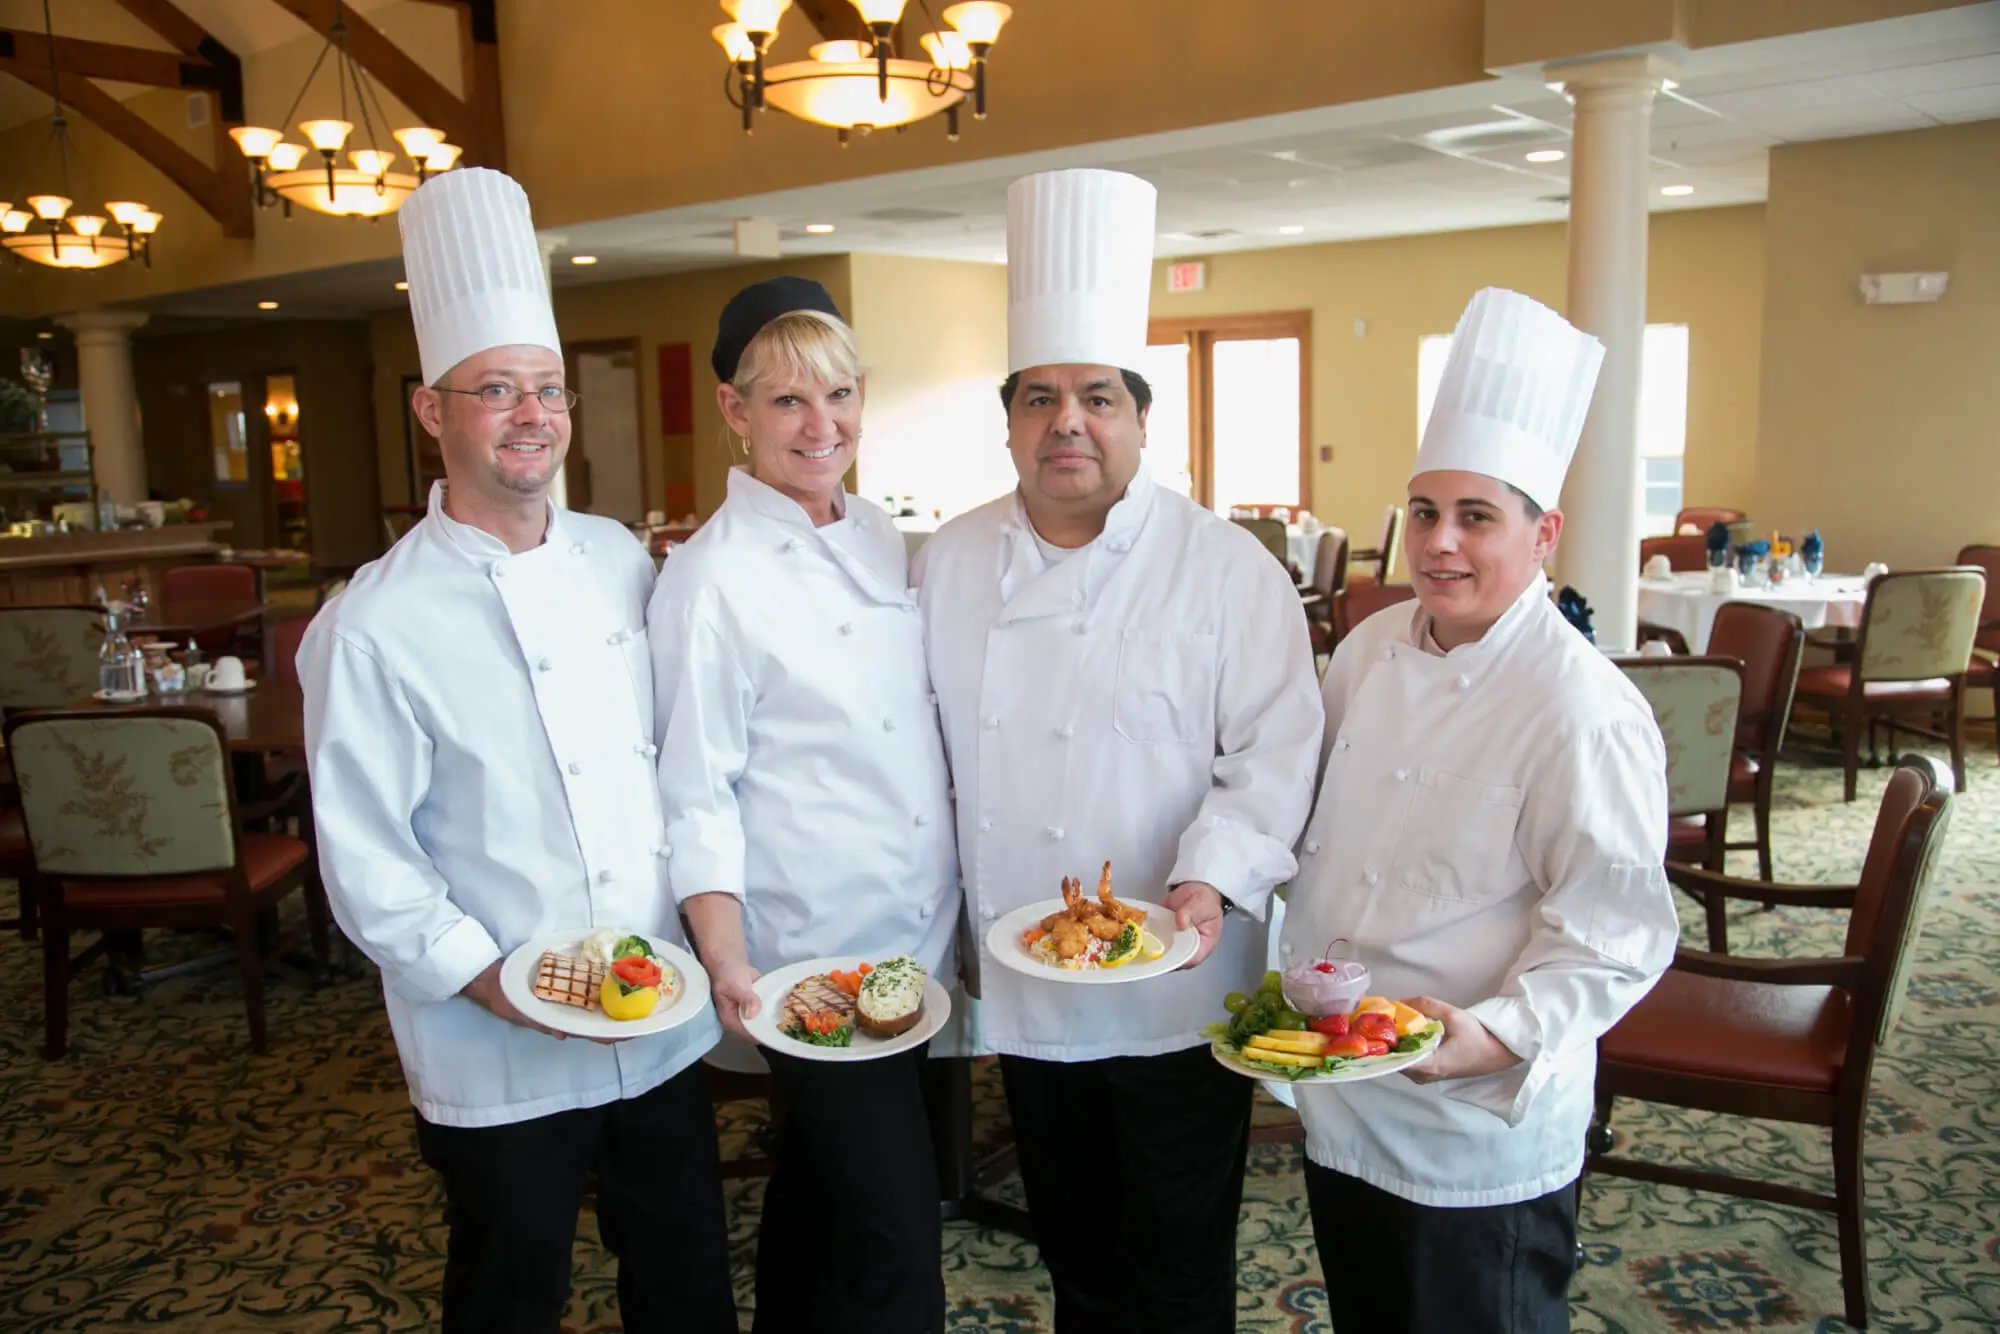 RLC chefs displaying meals